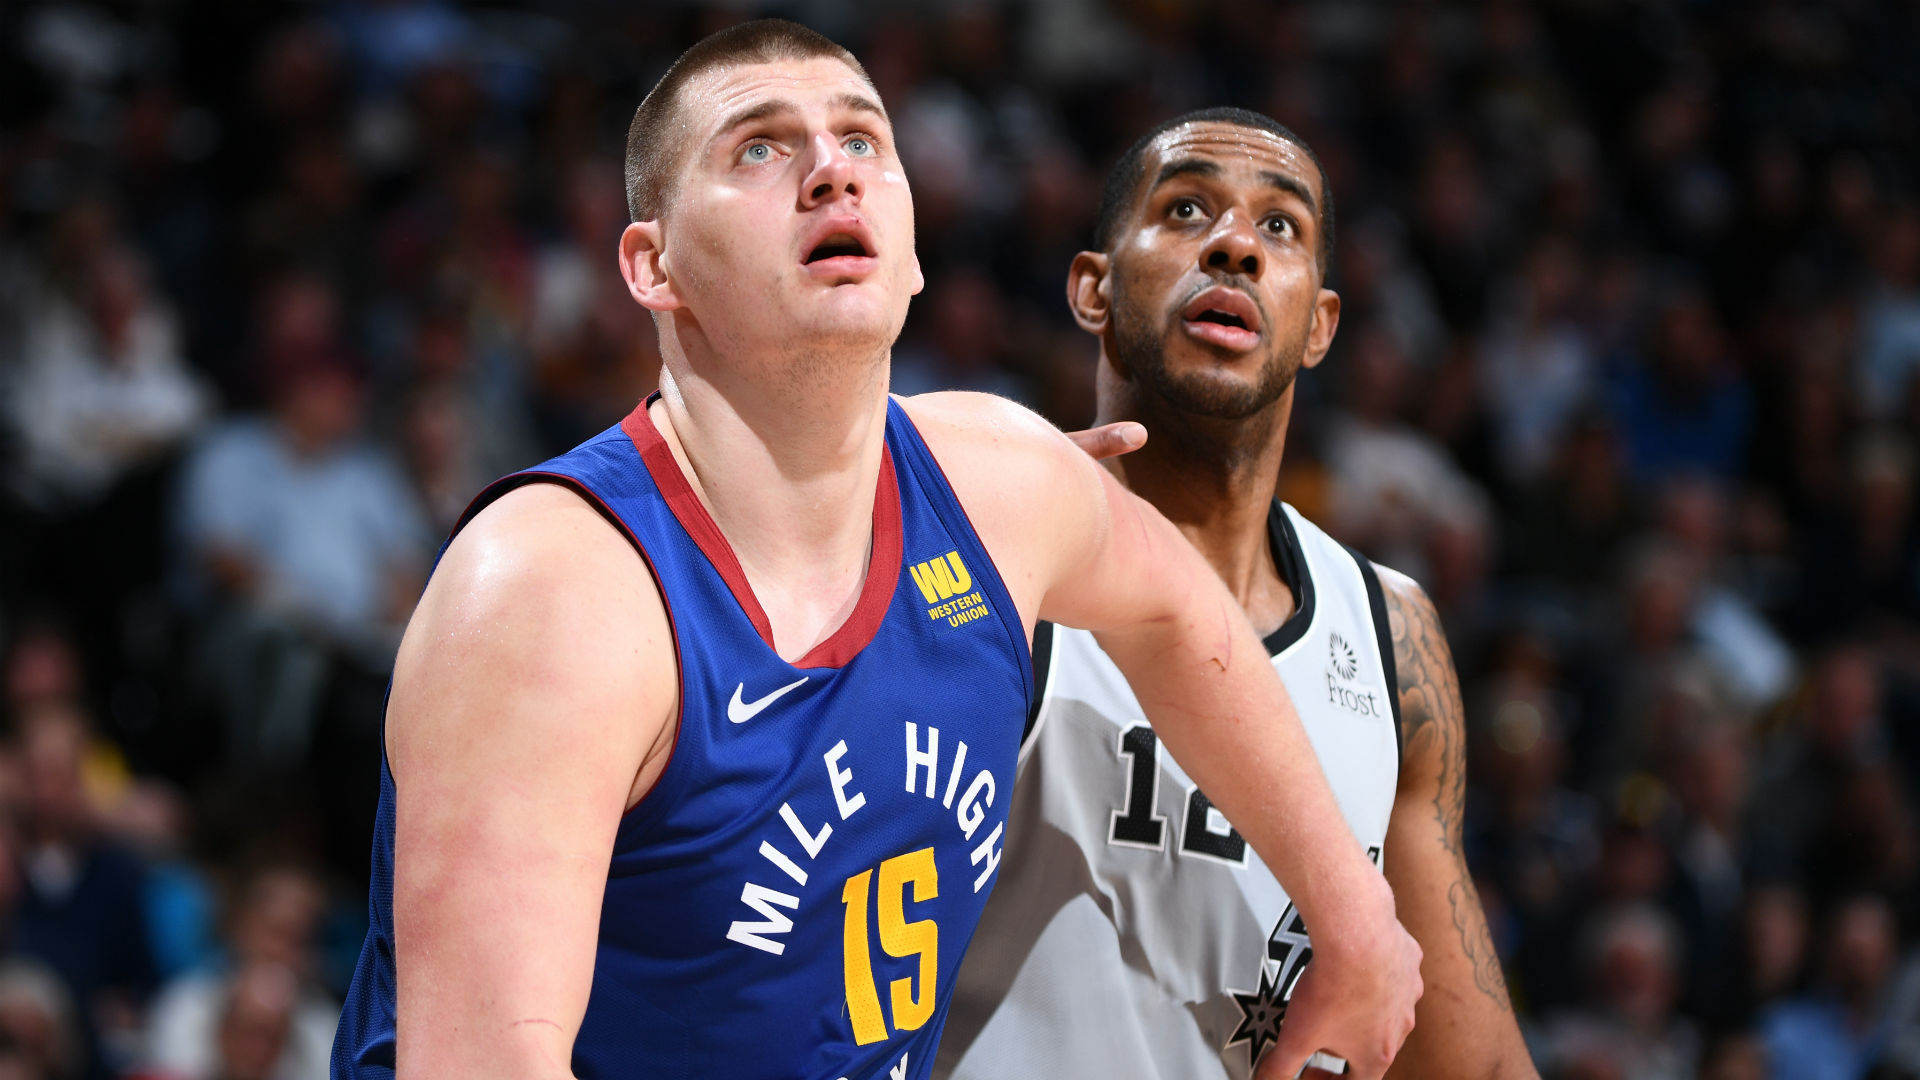 NBA Playoffs 2019: What to watch for in Game 6 between the Nuggets and Spurs | NBA.com ...